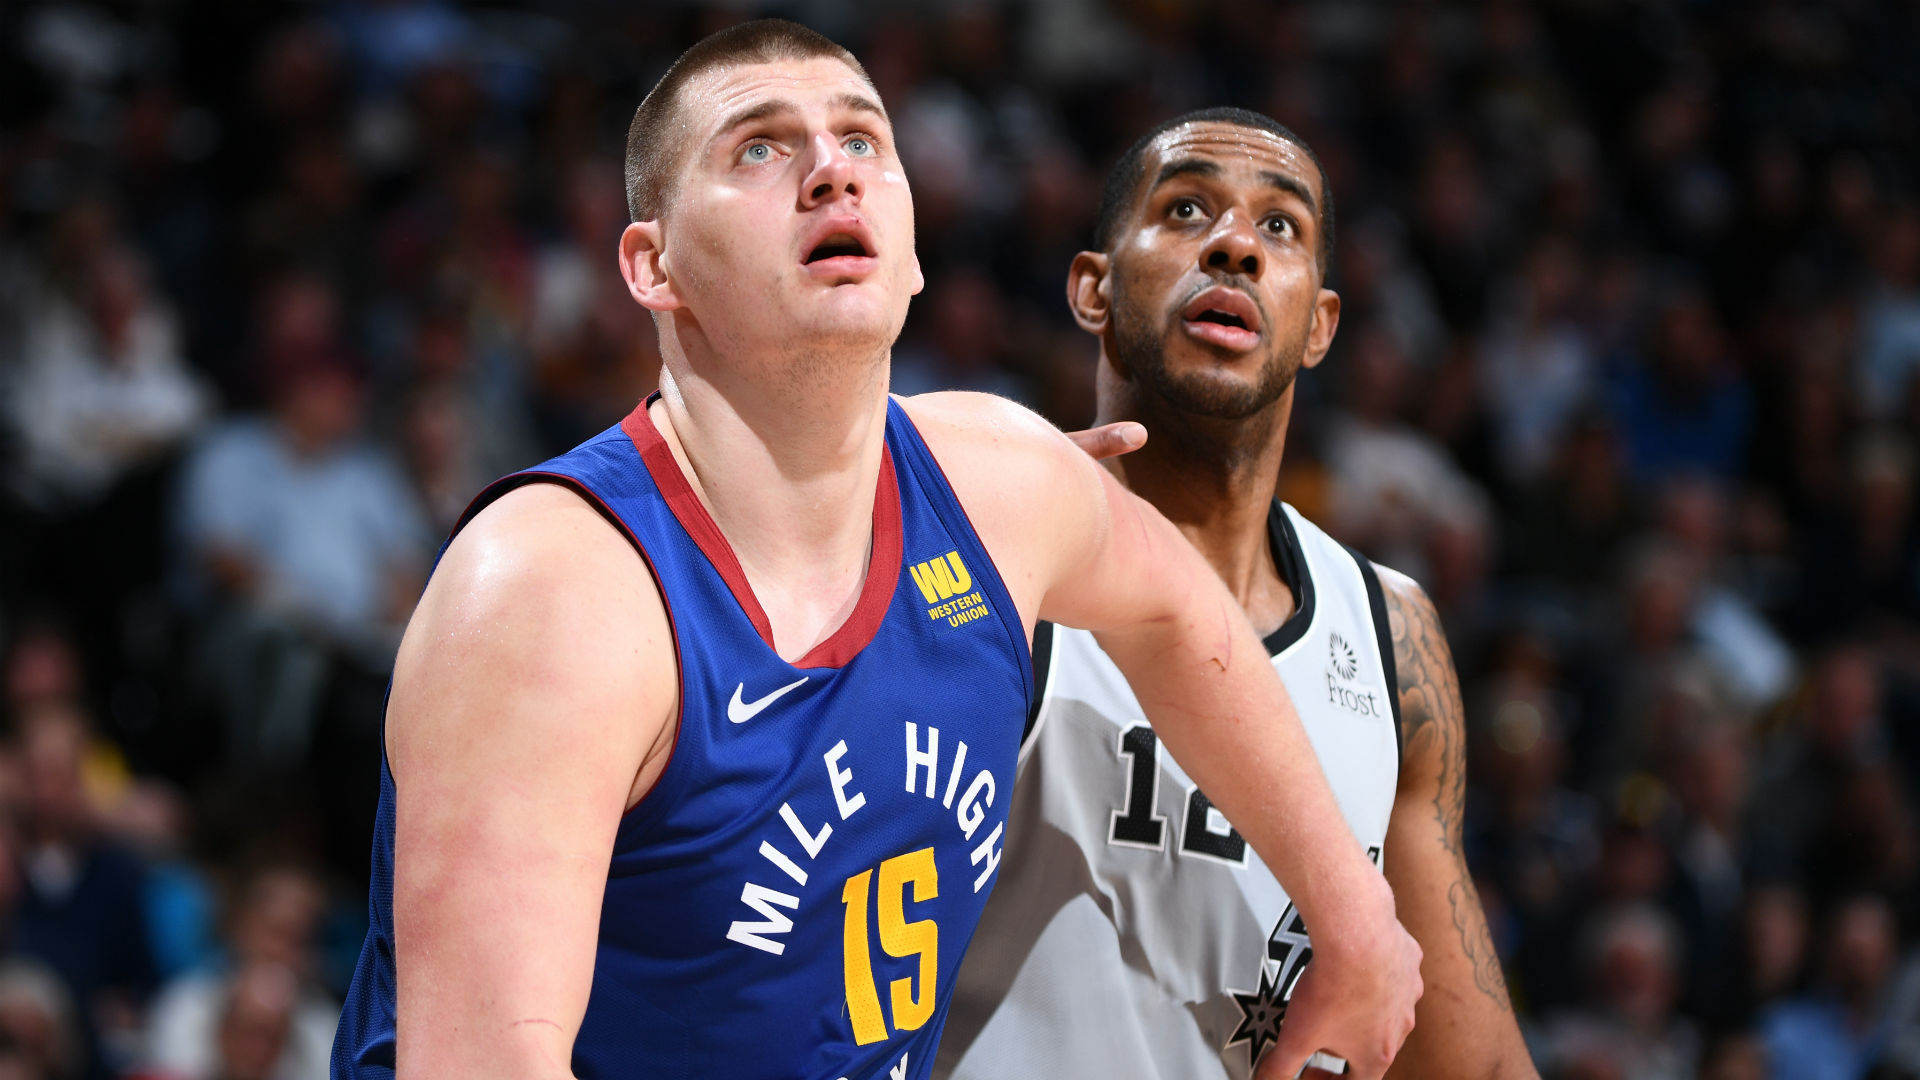 NBA Playoffs 2019: What to watch for in Game 6 between the Nuggets and Spurs | NBA.com ...